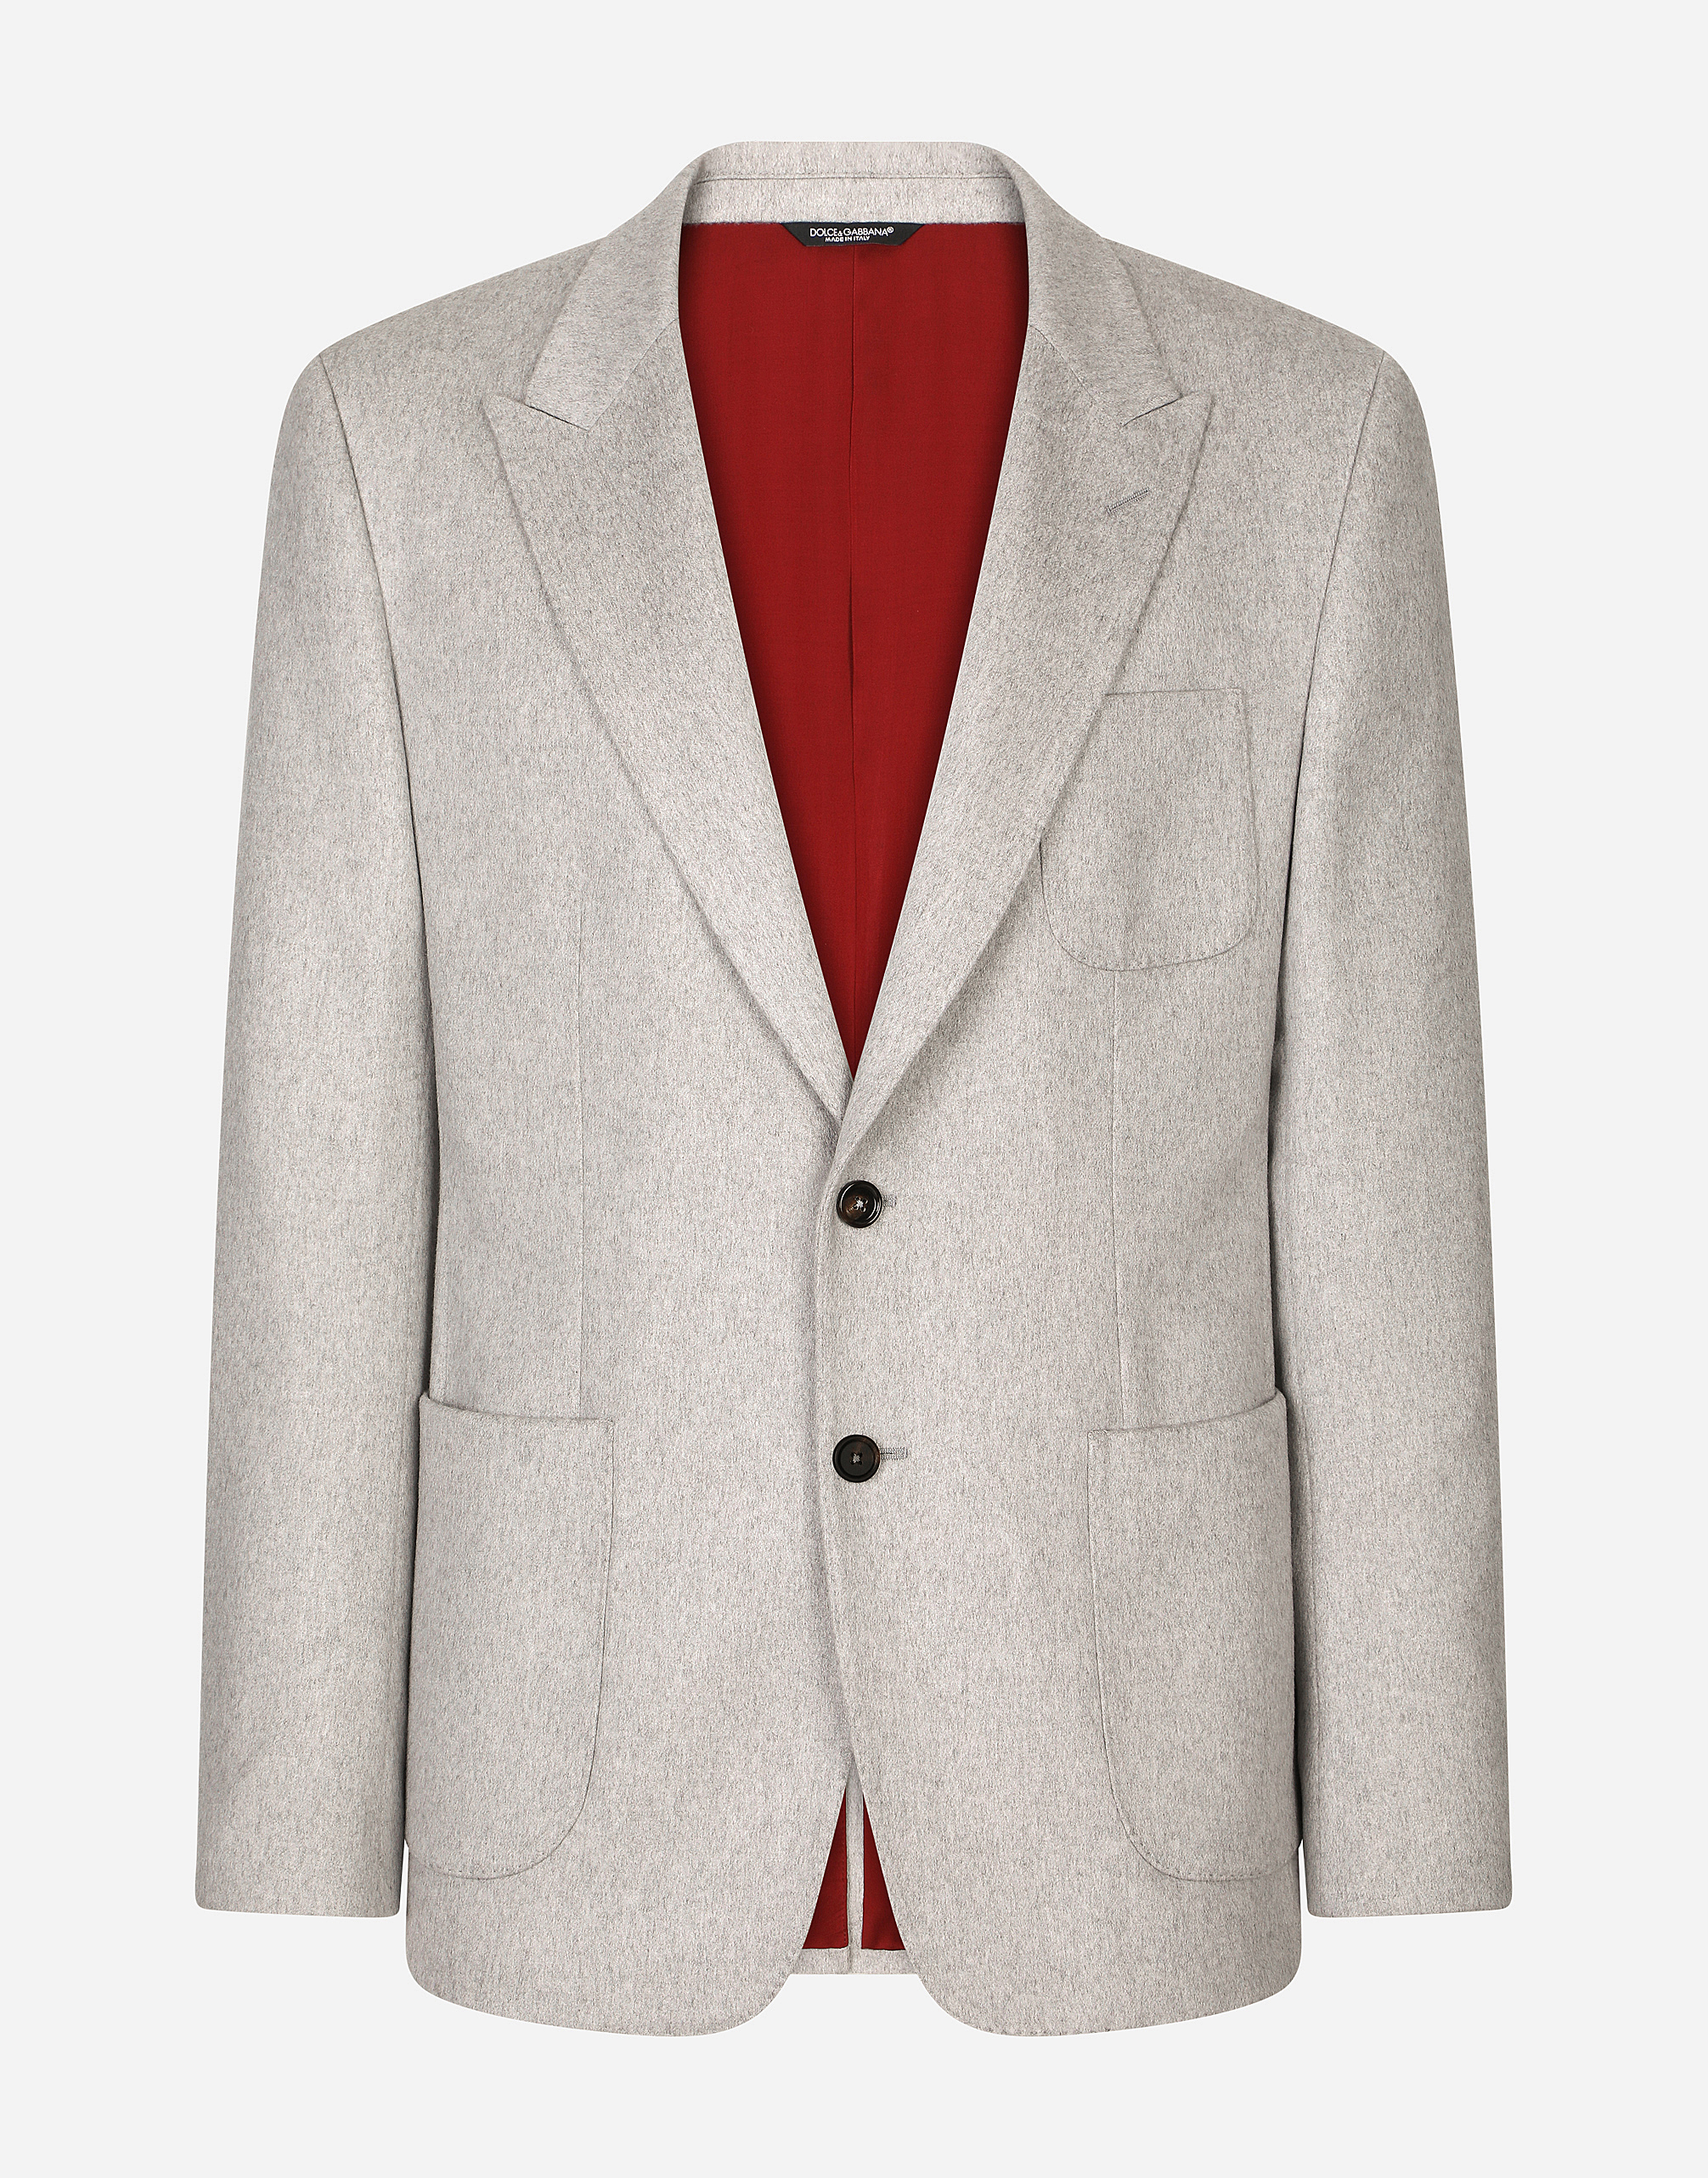 Deconstructed cashmere jacket in Grey